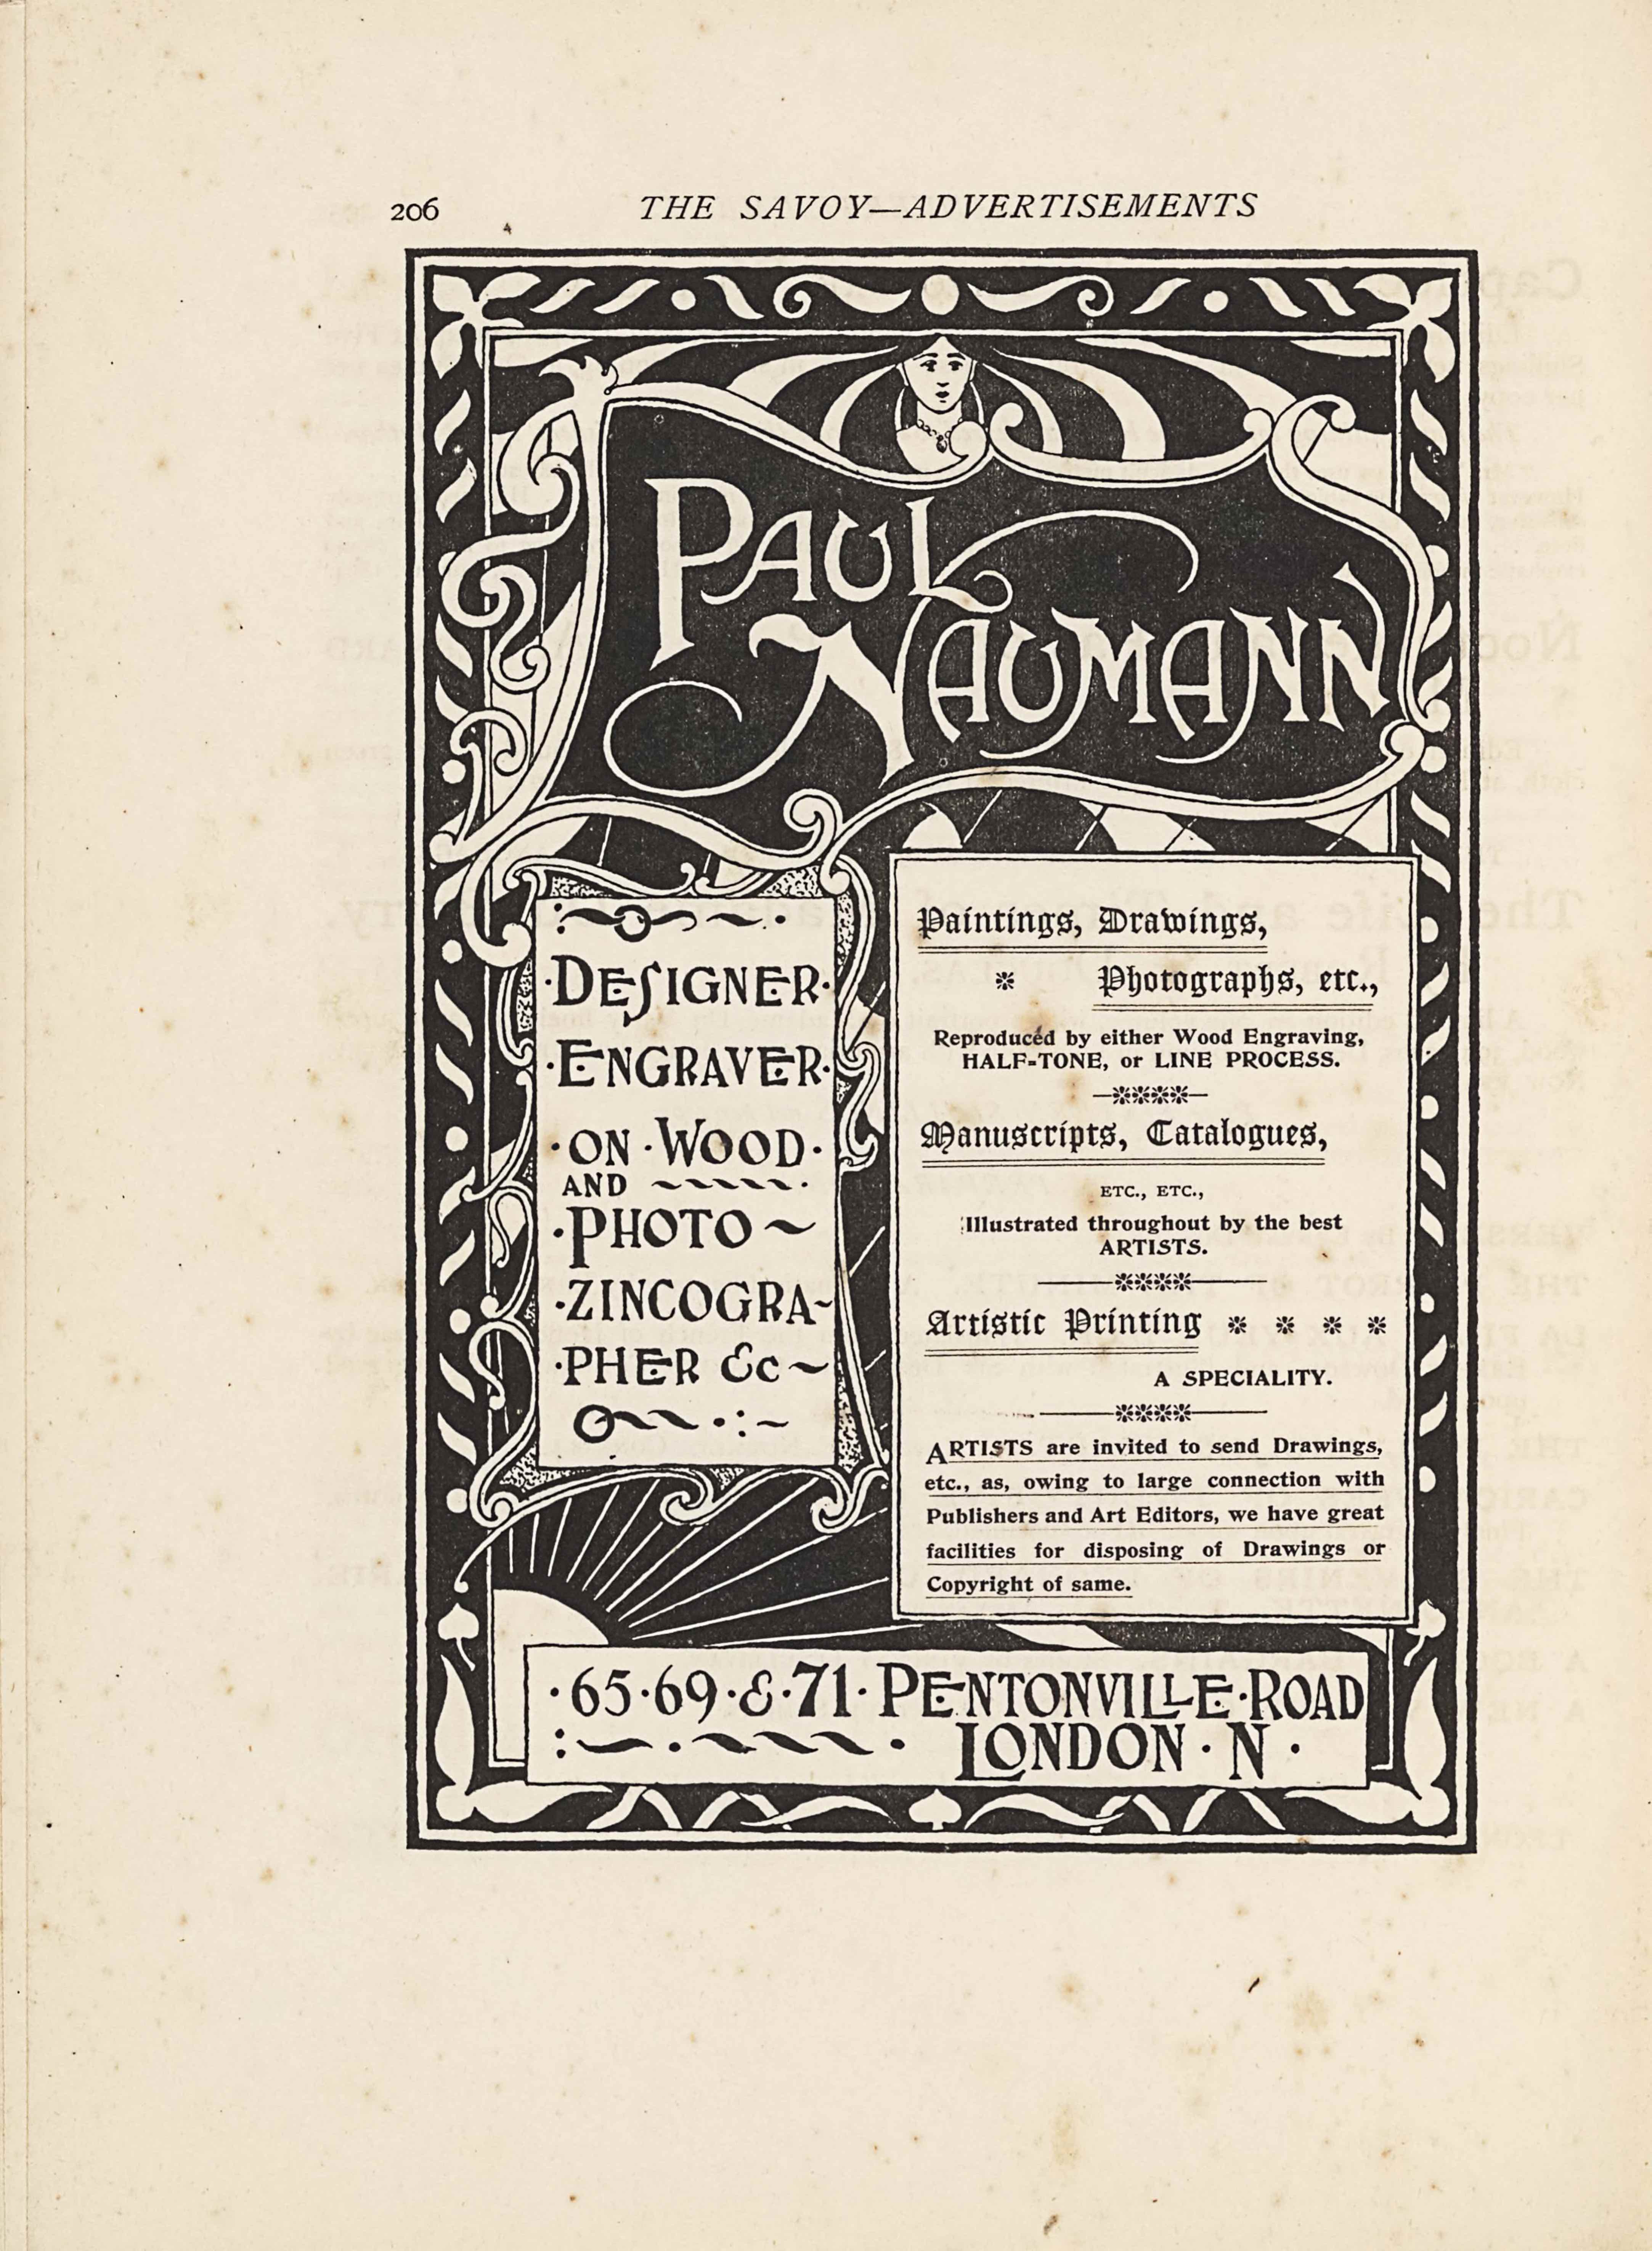 The lineblock image is in portrait orientation. The image is an advertisement for Paul Naumann’s design and engraving services with a description of his guidelines and contact information. The background of the text is a drawing of a frame and an image within that extends over top of the borderlines. The image has a single black line border with a white line border about one and half its thickness on the inside edge. On the inside of the white border is the frame designed with ornamental leaves in the corners and wave-like diagonal lines that are grouped in twos and then mirrored in the space between the corners. There are also dots in the centre of each mirrored pair of wave lines. The leaves match each other identically in the top left and rights corners, and the leaves distinctly match in the bottom left and right corners. The top corners have white leaves like fleur-de-lis, with a central stem and then three leaves jutting off in symmetry. The bottom corner leaves have only two leaves jutting off from a central ball. These border decorations are all white and the inverted colour of the black background. There is a thin white rectangular border forming the inside edge of the frame, which distinguishes between the border with its decorations and the image within. The top third of the inner image is an uneven, curved frame around the name “PAUL NAUMANN” [caps] that appears in text that is more than double the size of any other text on the page. The smaller name frame spills over the edges of the whole page frame. The fancy lettering that the name appears in has serifs and the stems on the letter “N” extend far out to the left and right of the letter. The lettering is white on a black background within the frame, and this frame is made of white curved lines that join together in curlicues at the corners. There are additional curlicues added on the left side of this frame. In the small space between the top of the name frame and the external frame is a woman’s face and upper chest. She has on a pendant chain necklace and has simple features: a small circle for a mouth, a slight horizontal line for the nose, and black ovals topped with black lines for eyes and brows. Her hair appears to be streaked in black and white strips and flows away from her head at great width and length. This hair effect takes up the space from the left to right border in the small area above the name frame. Below the name on the remainder of the page are three more boxes filled with text. The bottom two-thirds of the page are divided up unevenly between the boxes. On the left third, starting just below the name frame, is a long rectangle that has a perfectly square edged frame backgrounded by a curlicue frame that protrudes out in various places. In this box at the top there is a waved line cut in half by a circle, and another small waved line appears to the right with a single dot at the end. Below this design is the text: “DESIGNER” [caps]. In the next line down is the text: “ENGRAVER” [caps], and below that in the next line is the text: “ON WOOD” [caps]. In the line below there is the text: “AND” [caps] in half sized typeface compared to the rest in the box, and to the right of that text is a series of five short waved lines underscoring the word “WOOD” [caps] in the above line. In the next line down is the text: “PHOTO” [caps] followed by one waved line. In the next line down is the text: “ZINCOGRA” [caps] followed by a small waved line. One line down has the text: “PHER &c” [caps] with another waved line. In the final line of the box there is a circle with a waved line coming out the right side of it and another identical line appears just to the right, followed by a dot and then a colon arrangement of two dots followed by one short hyphen line. To the right of this box is another that takes up the remaining two-thirds of the space to the right. This box has perfectly squared edges and has two black line borders separated by a small white space. The text inside is a different, more medieval, style of typeface from the aforementioned name and designer information. The text in the first line is: “Paintings, Drawings,” underscored by two lines. There is a small starburst icon below that left aligned text. To the right of the star in the same line is the right aligned text: “Photographs, etc.,” which is also underscored with two lines. The line below has half-sized text to the rest in the box. The text is: “Reproduced by either Wood Engraving,” and then the line below shares the same size and has the text: “HALF-TONE, or LINE PROCESS” [caps]. Below that text are four starburst icons with lines extending out from both sides. In the line below is the text: “Manuscripts, Catalogues,” and that is underscored by two lines. In the next line down is the text: “ETC., ETC.,” [caps]. One line down has the text: “Illustrated throughout by the best” and then the sentence continues down to the next line with the text: “ARTISTS.” [caps]. The line below has another series of four starburst icons with lines protruding out from both sides, but these lines extend further out than the ones above. The line below that has the text: “Artistic Printing”, which is underscored by two lines and then in the same line on the right side there are four starburst icons spaced out to fill up the remaining half of the line. In the line below right aligned is the text: “A SPECIALTY.” [caps]. Underneath that is an identical four starburst icon design with wide reaching lines extending out from the sides as two lines above. Below that is a sentence spread among five lines. The first line has the text: “ARTISTS [caps] are invited to send Drawings,”. The next line reads: “etc., as, owing to large connection with”. The next line is: “Publishers and Art Editors, we have great”. The next line has the text: “facilities for disposing of Drawings or”. The final line reads: “Copyright of same.” and each of these five lines is underscored by a single line. This box on the right side is longer than the one to the left. Just below the bottom of it is the last text box that is a rectangle extending horizontally. In this box there is large sized typeface in two lines. The first line reads: “65 69 & 71 PENTONVILLE ROAD [caps]” with dots placed between each of the numbers. The second line reads: “LONDON N” [caps] but this text is right aligned and to the left of it appears a series of four waved lines with a dot between the first and second and one dot following the last wave. In the bottom left corner of the inner image there is a white sun with sunbeams made of straight lines stretching out towards the middle of the page. The background is all in the inverted style, with white text boxes atop a black background with some white designs peeking through.